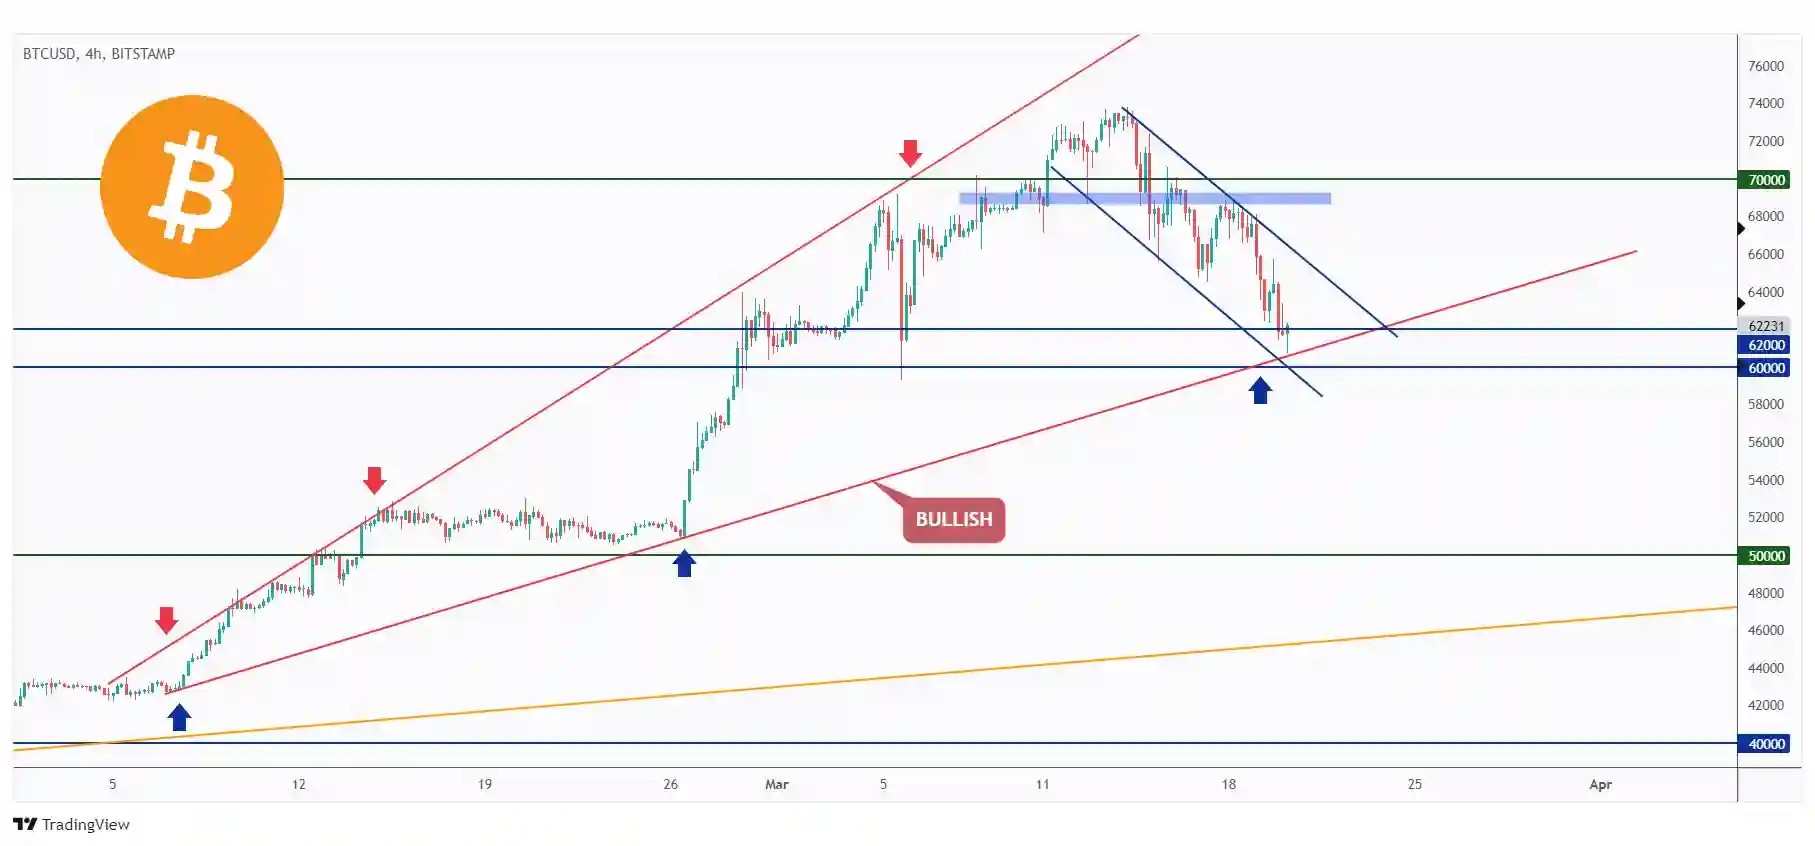 BTC 4h chart overall bullish trading within the rising wedge pattern and currently hovering around $60,000 support.